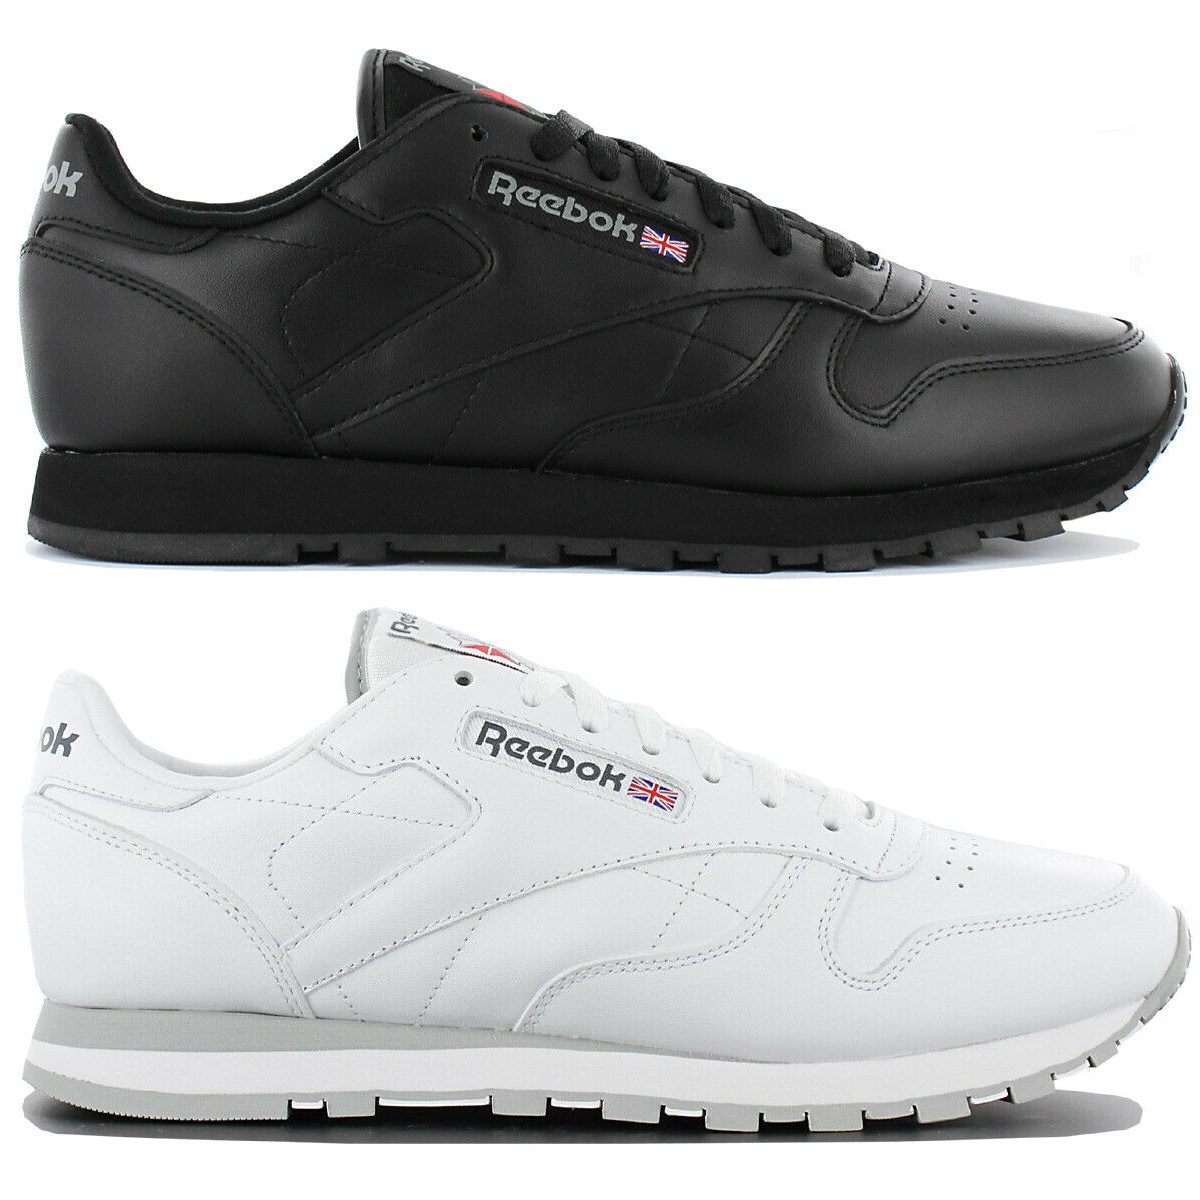 Reebok Classic Leather Mens Trainer Leather Shoes Leisure Trainers RBK